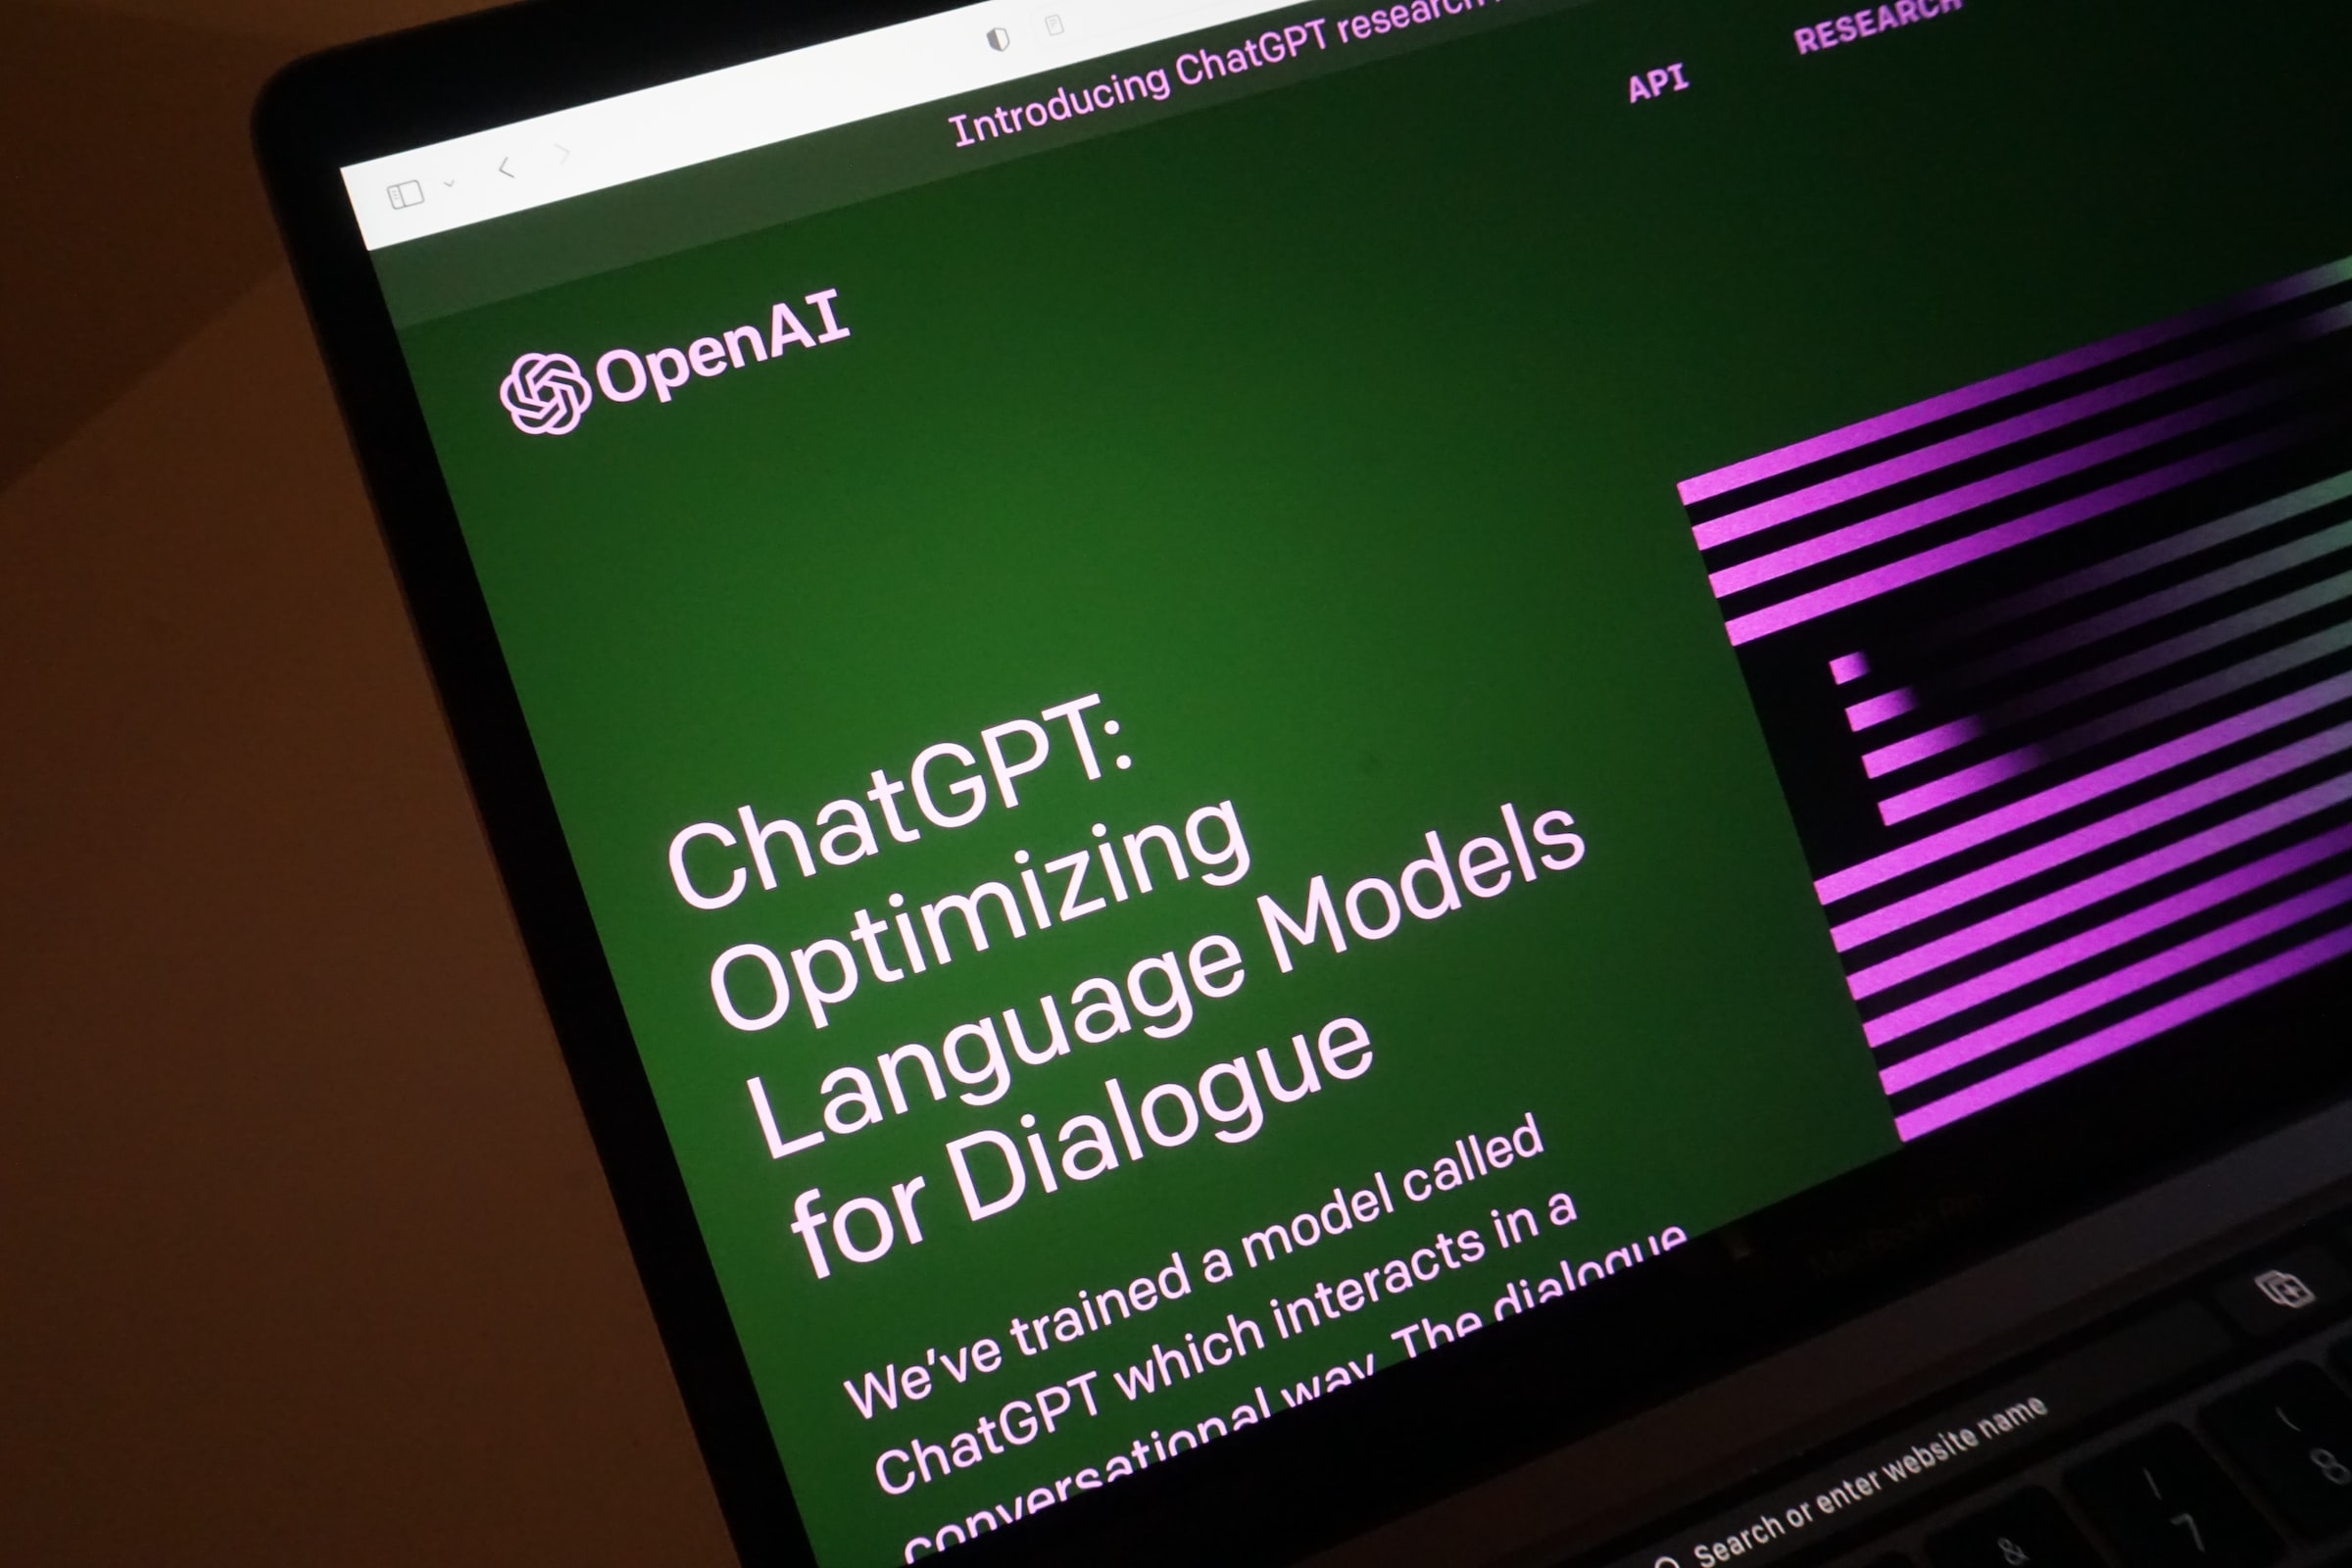 Image of the ChatGPT website